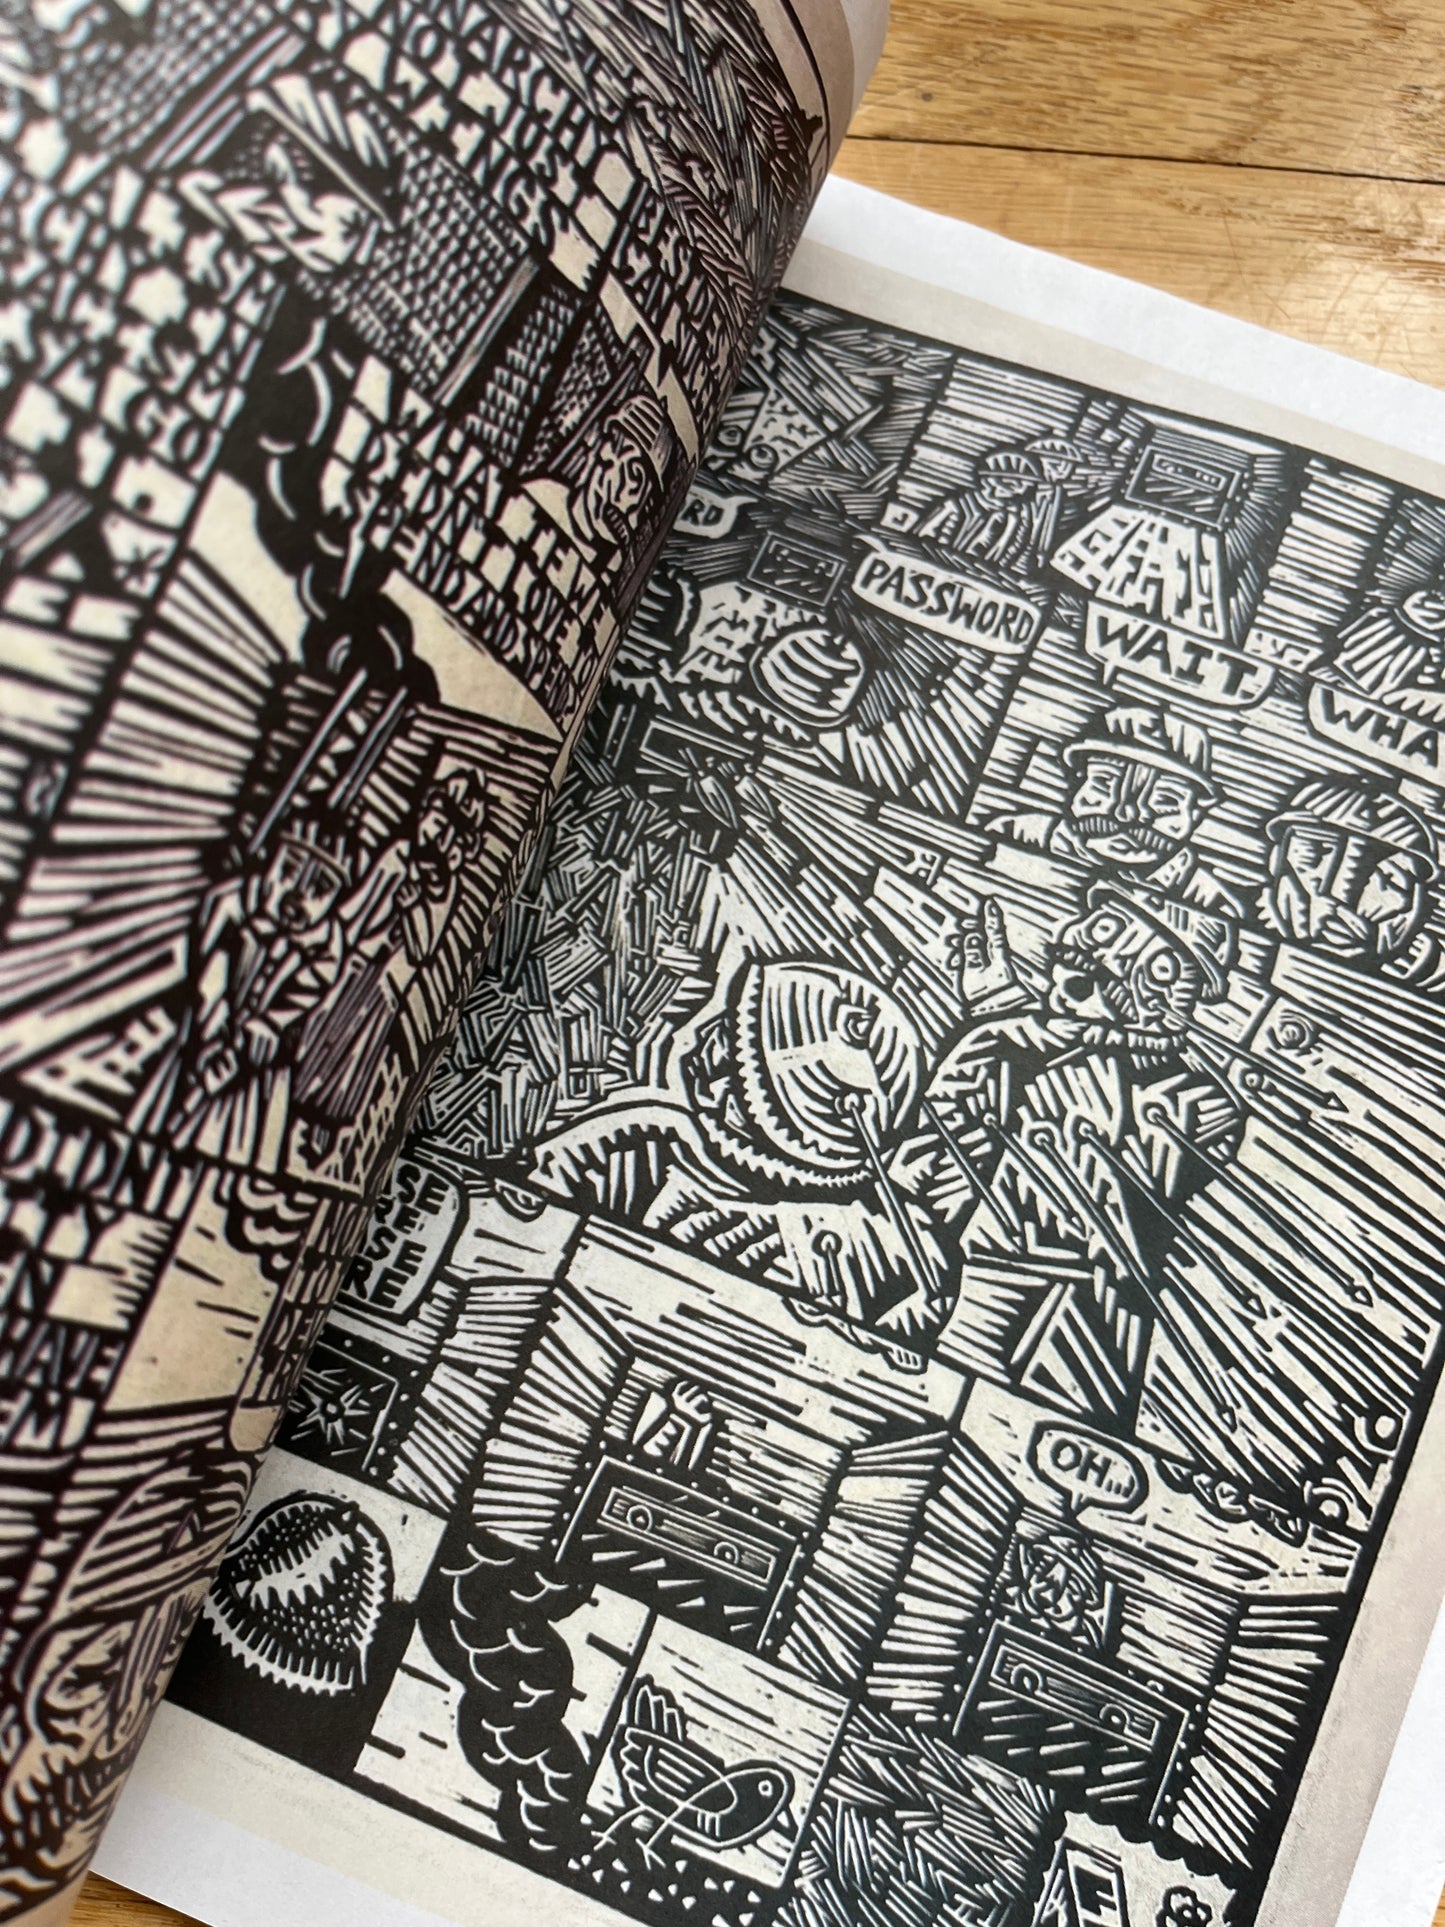 Things To Do: A Collection of Woodcut Comics